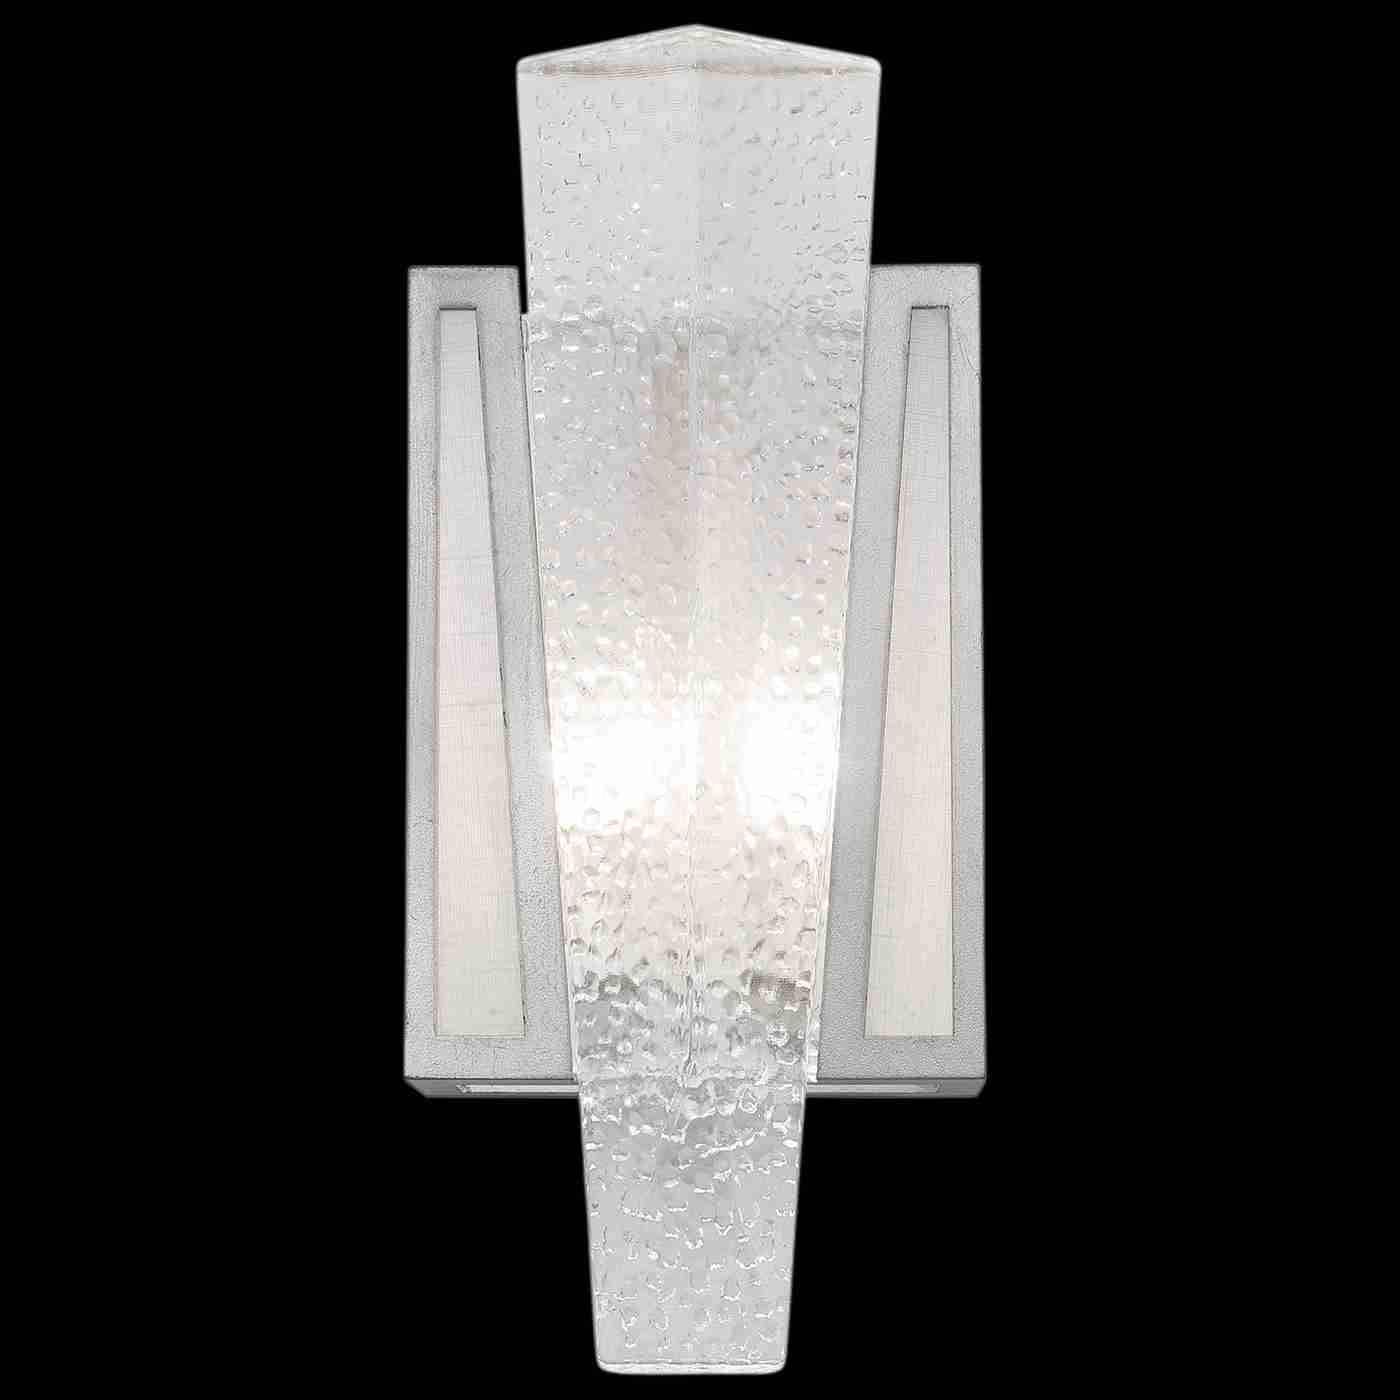 Crownstone Sconce Silver